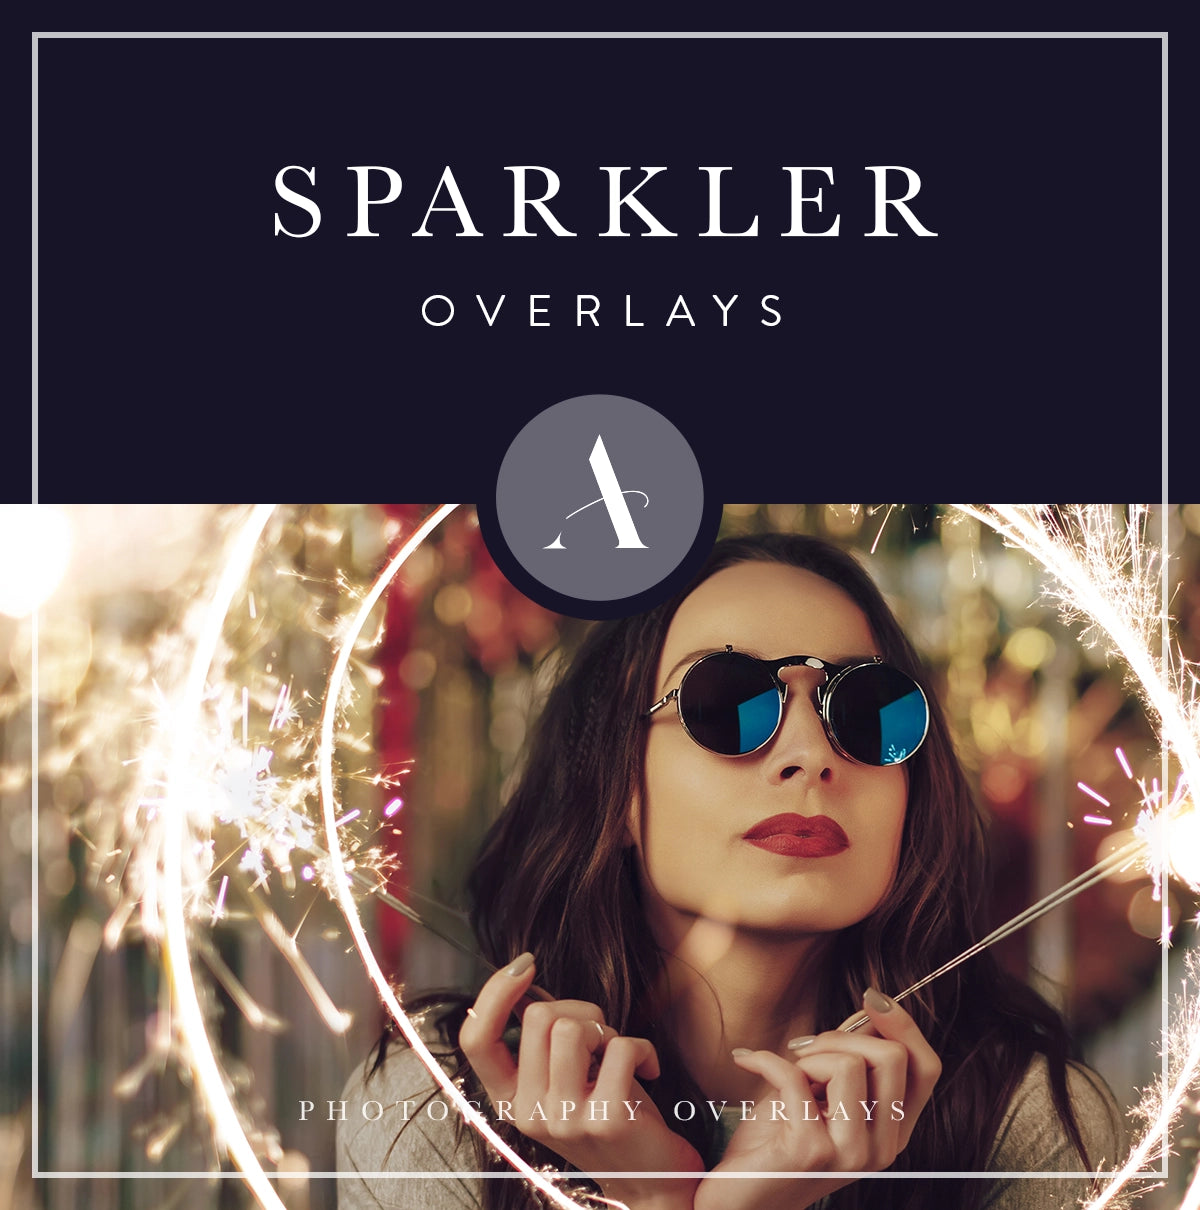 sparkler overlays for photoshop, photo editing, digital photography and photographers